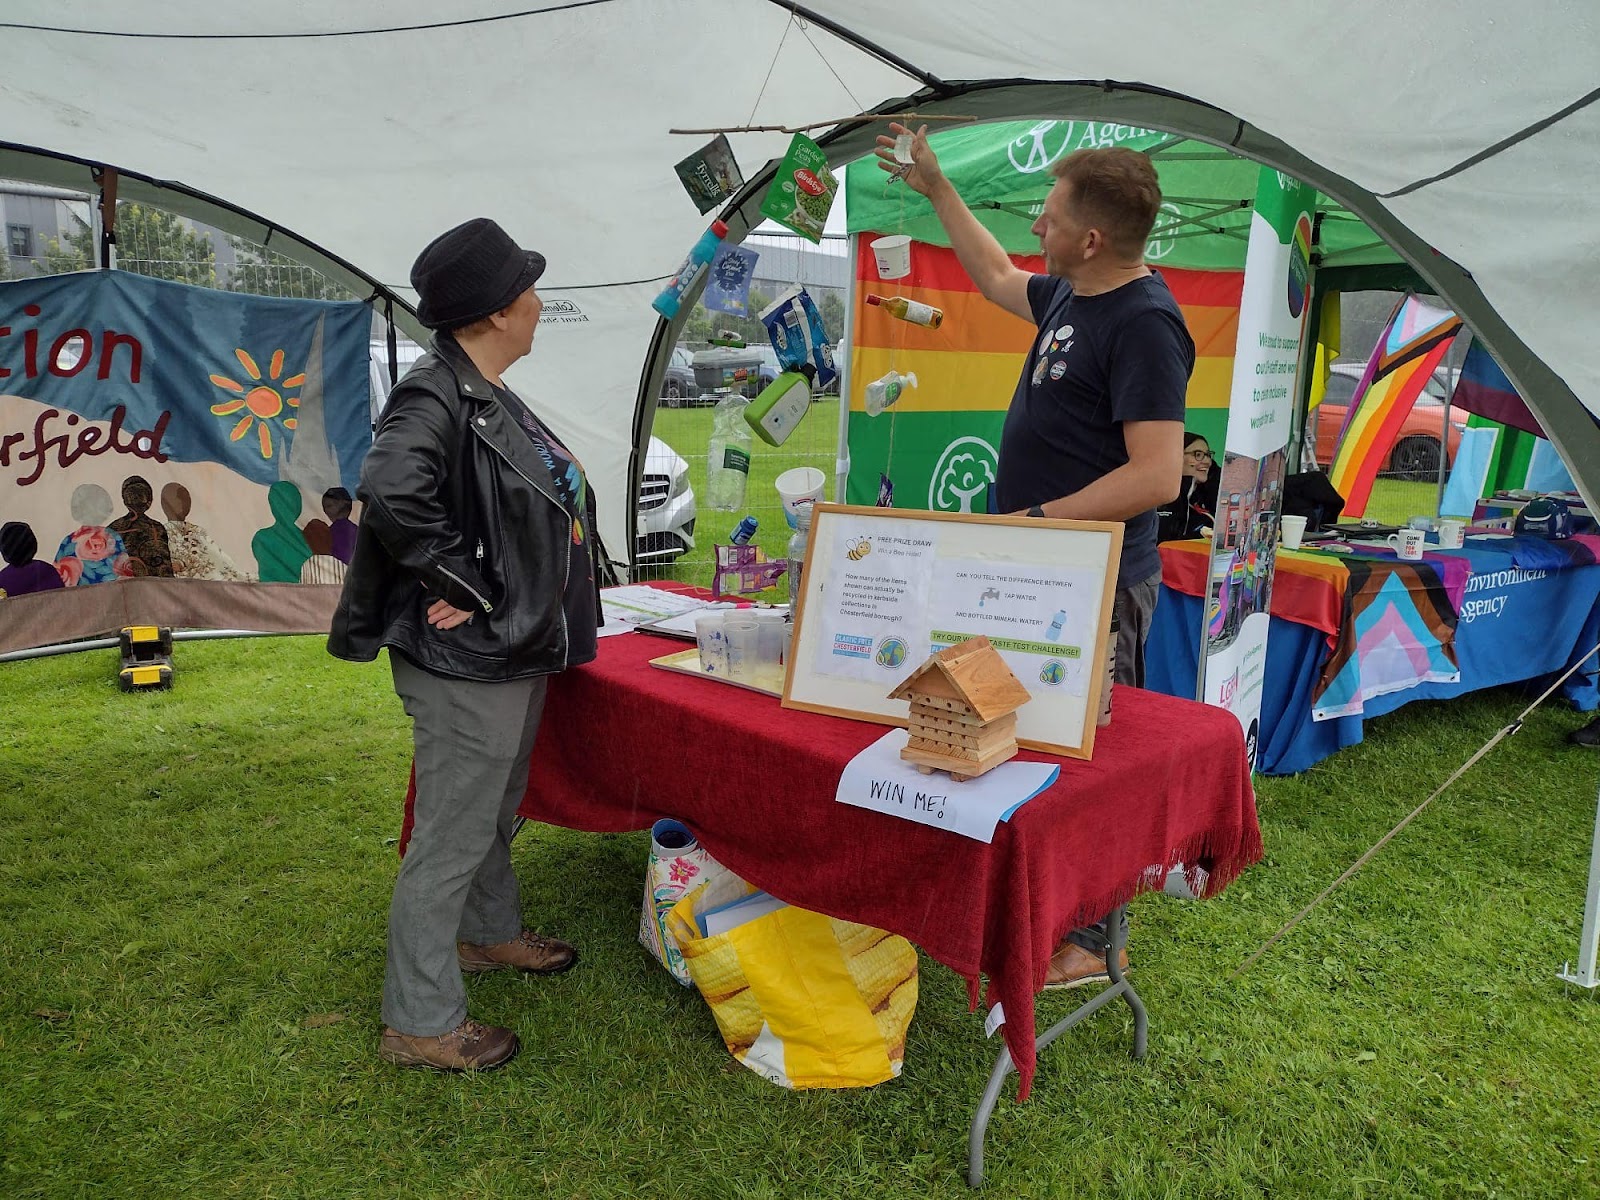 The Transition stall at Chesterfield Pride, where a volunteer is highlighting a display about plastic waste.